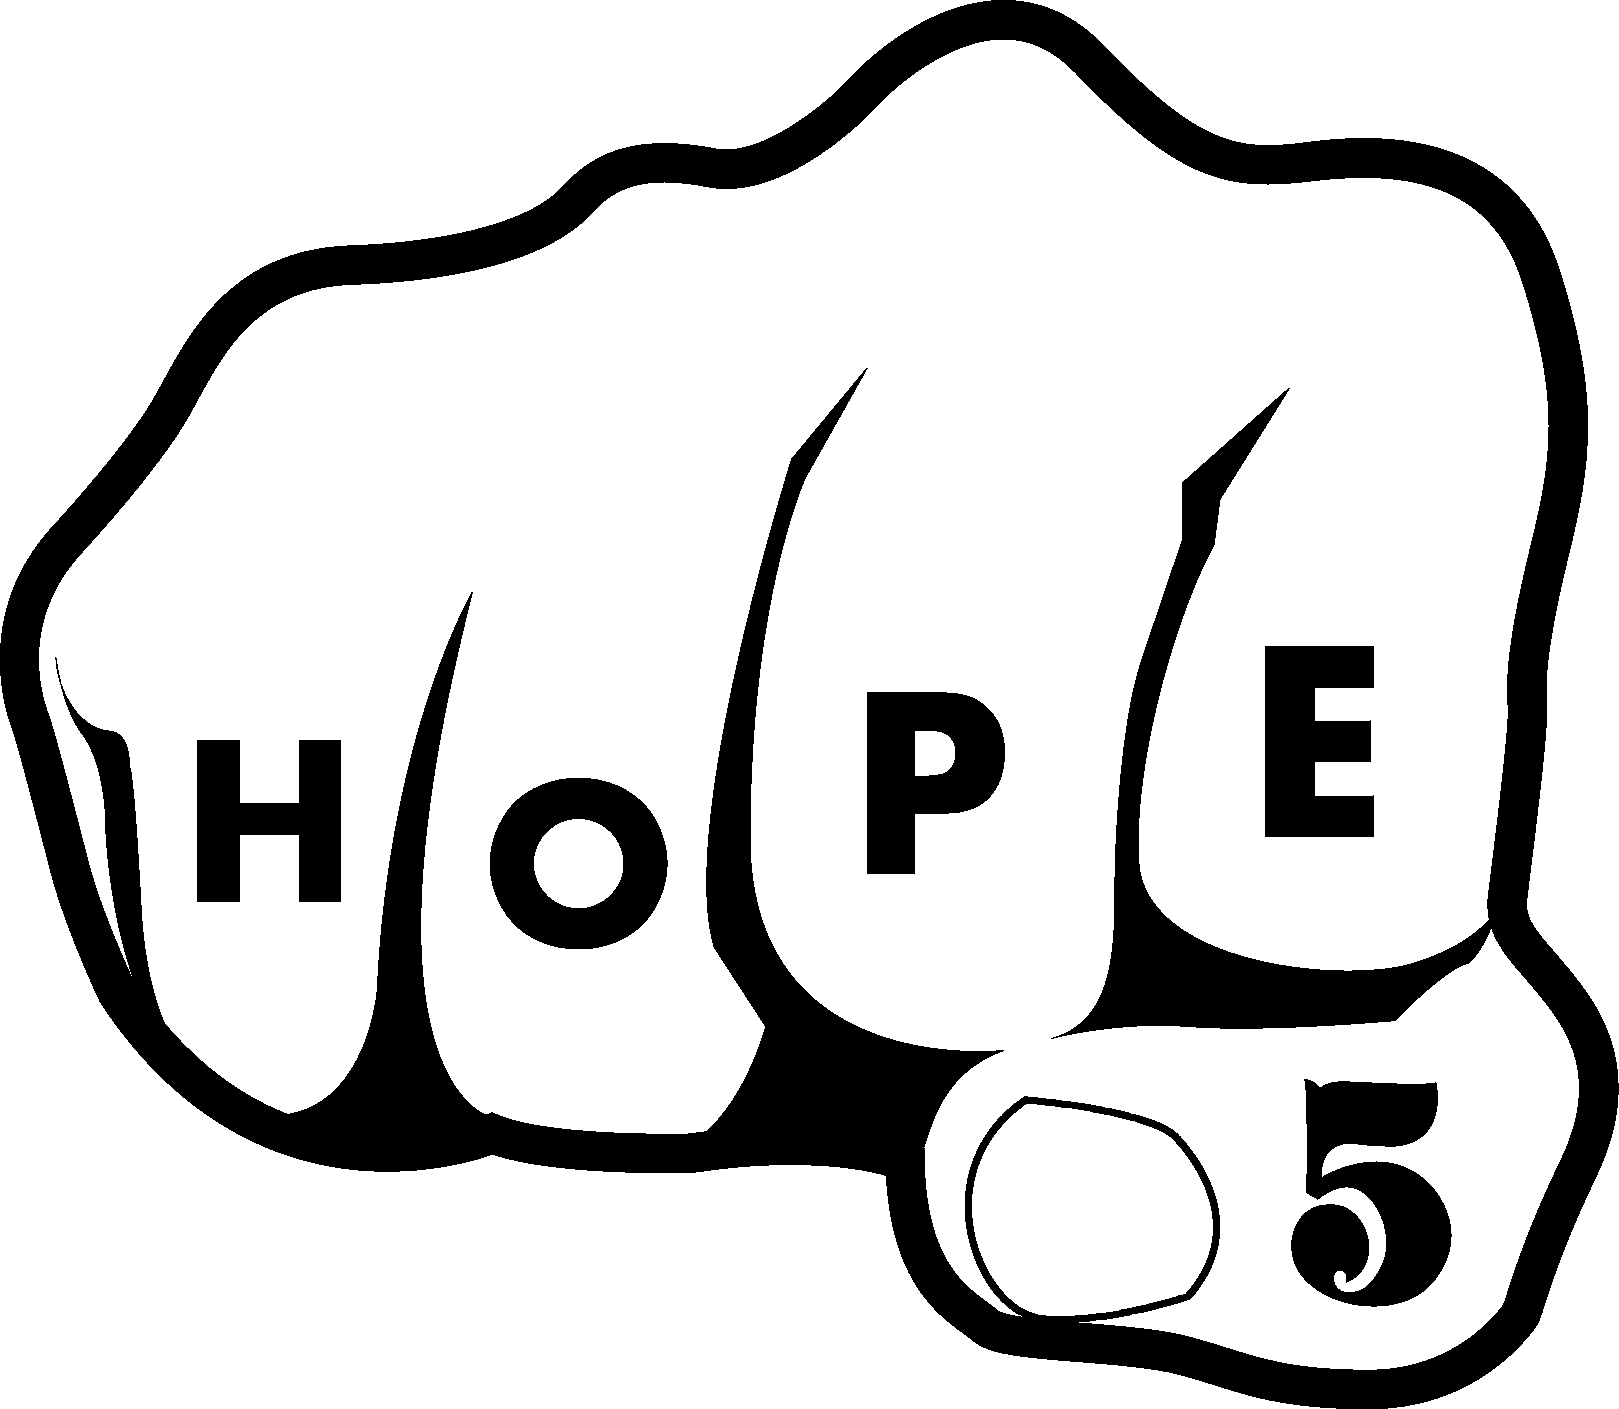 hope_fist.png